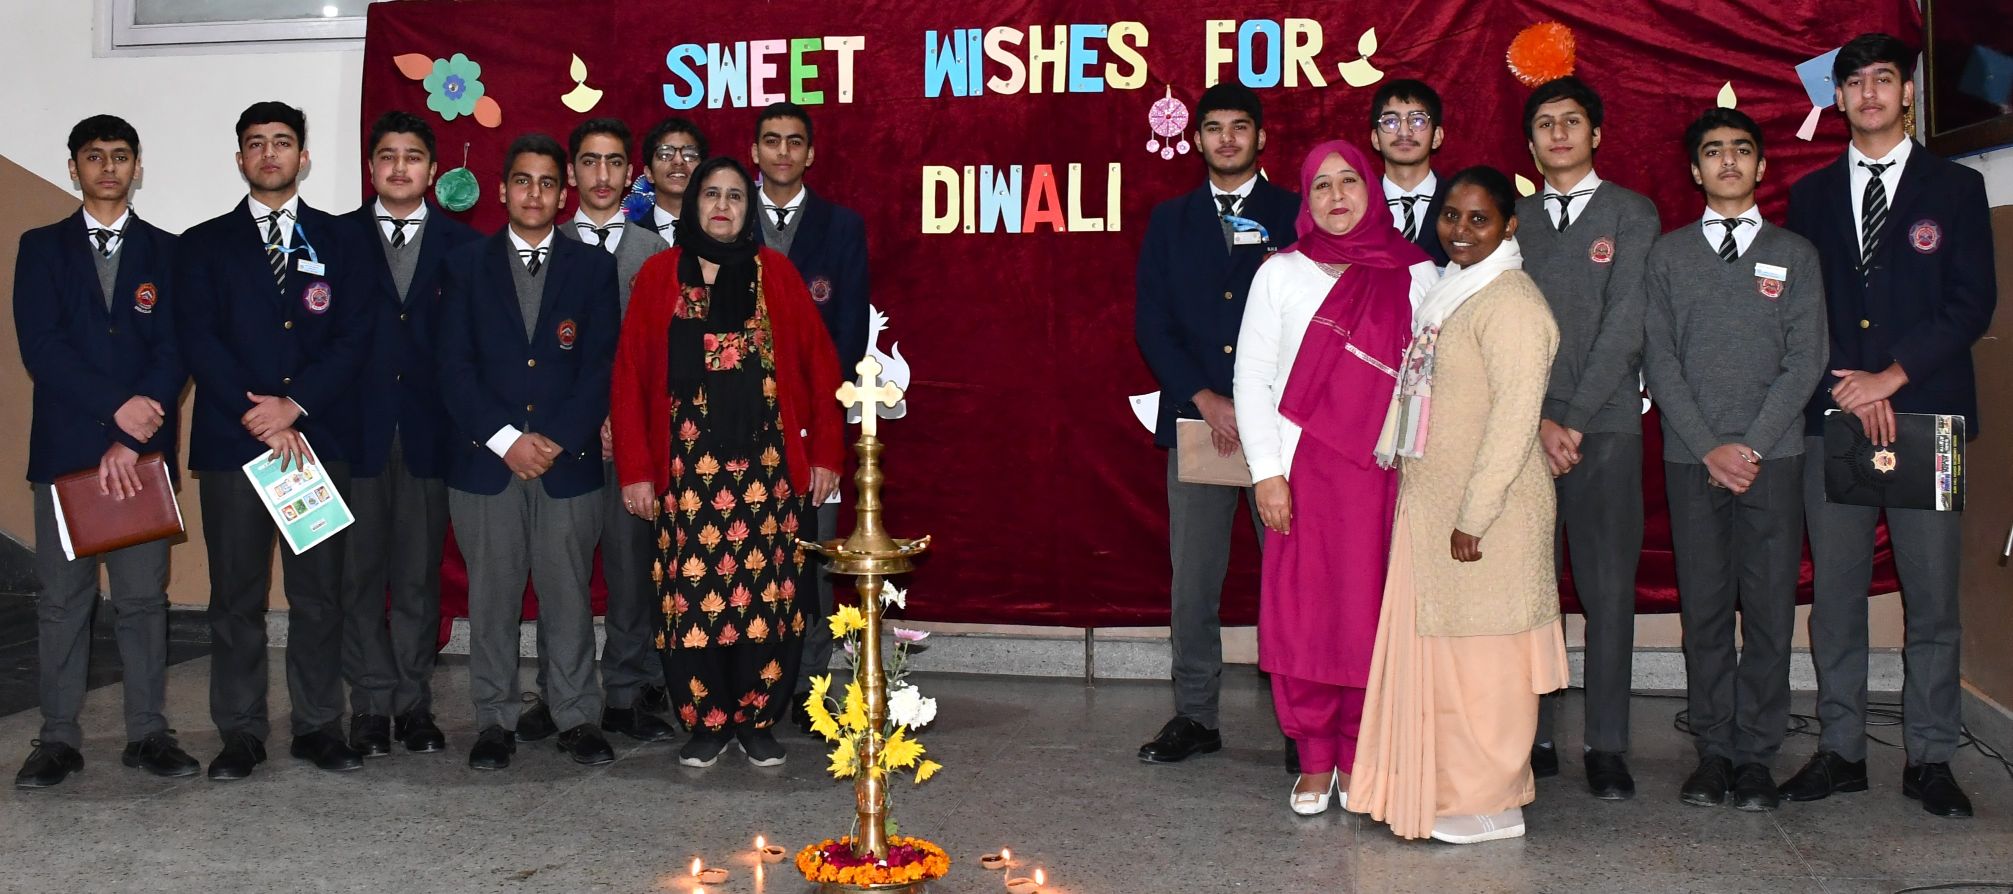 SWEET WISHES FOR DIWALI